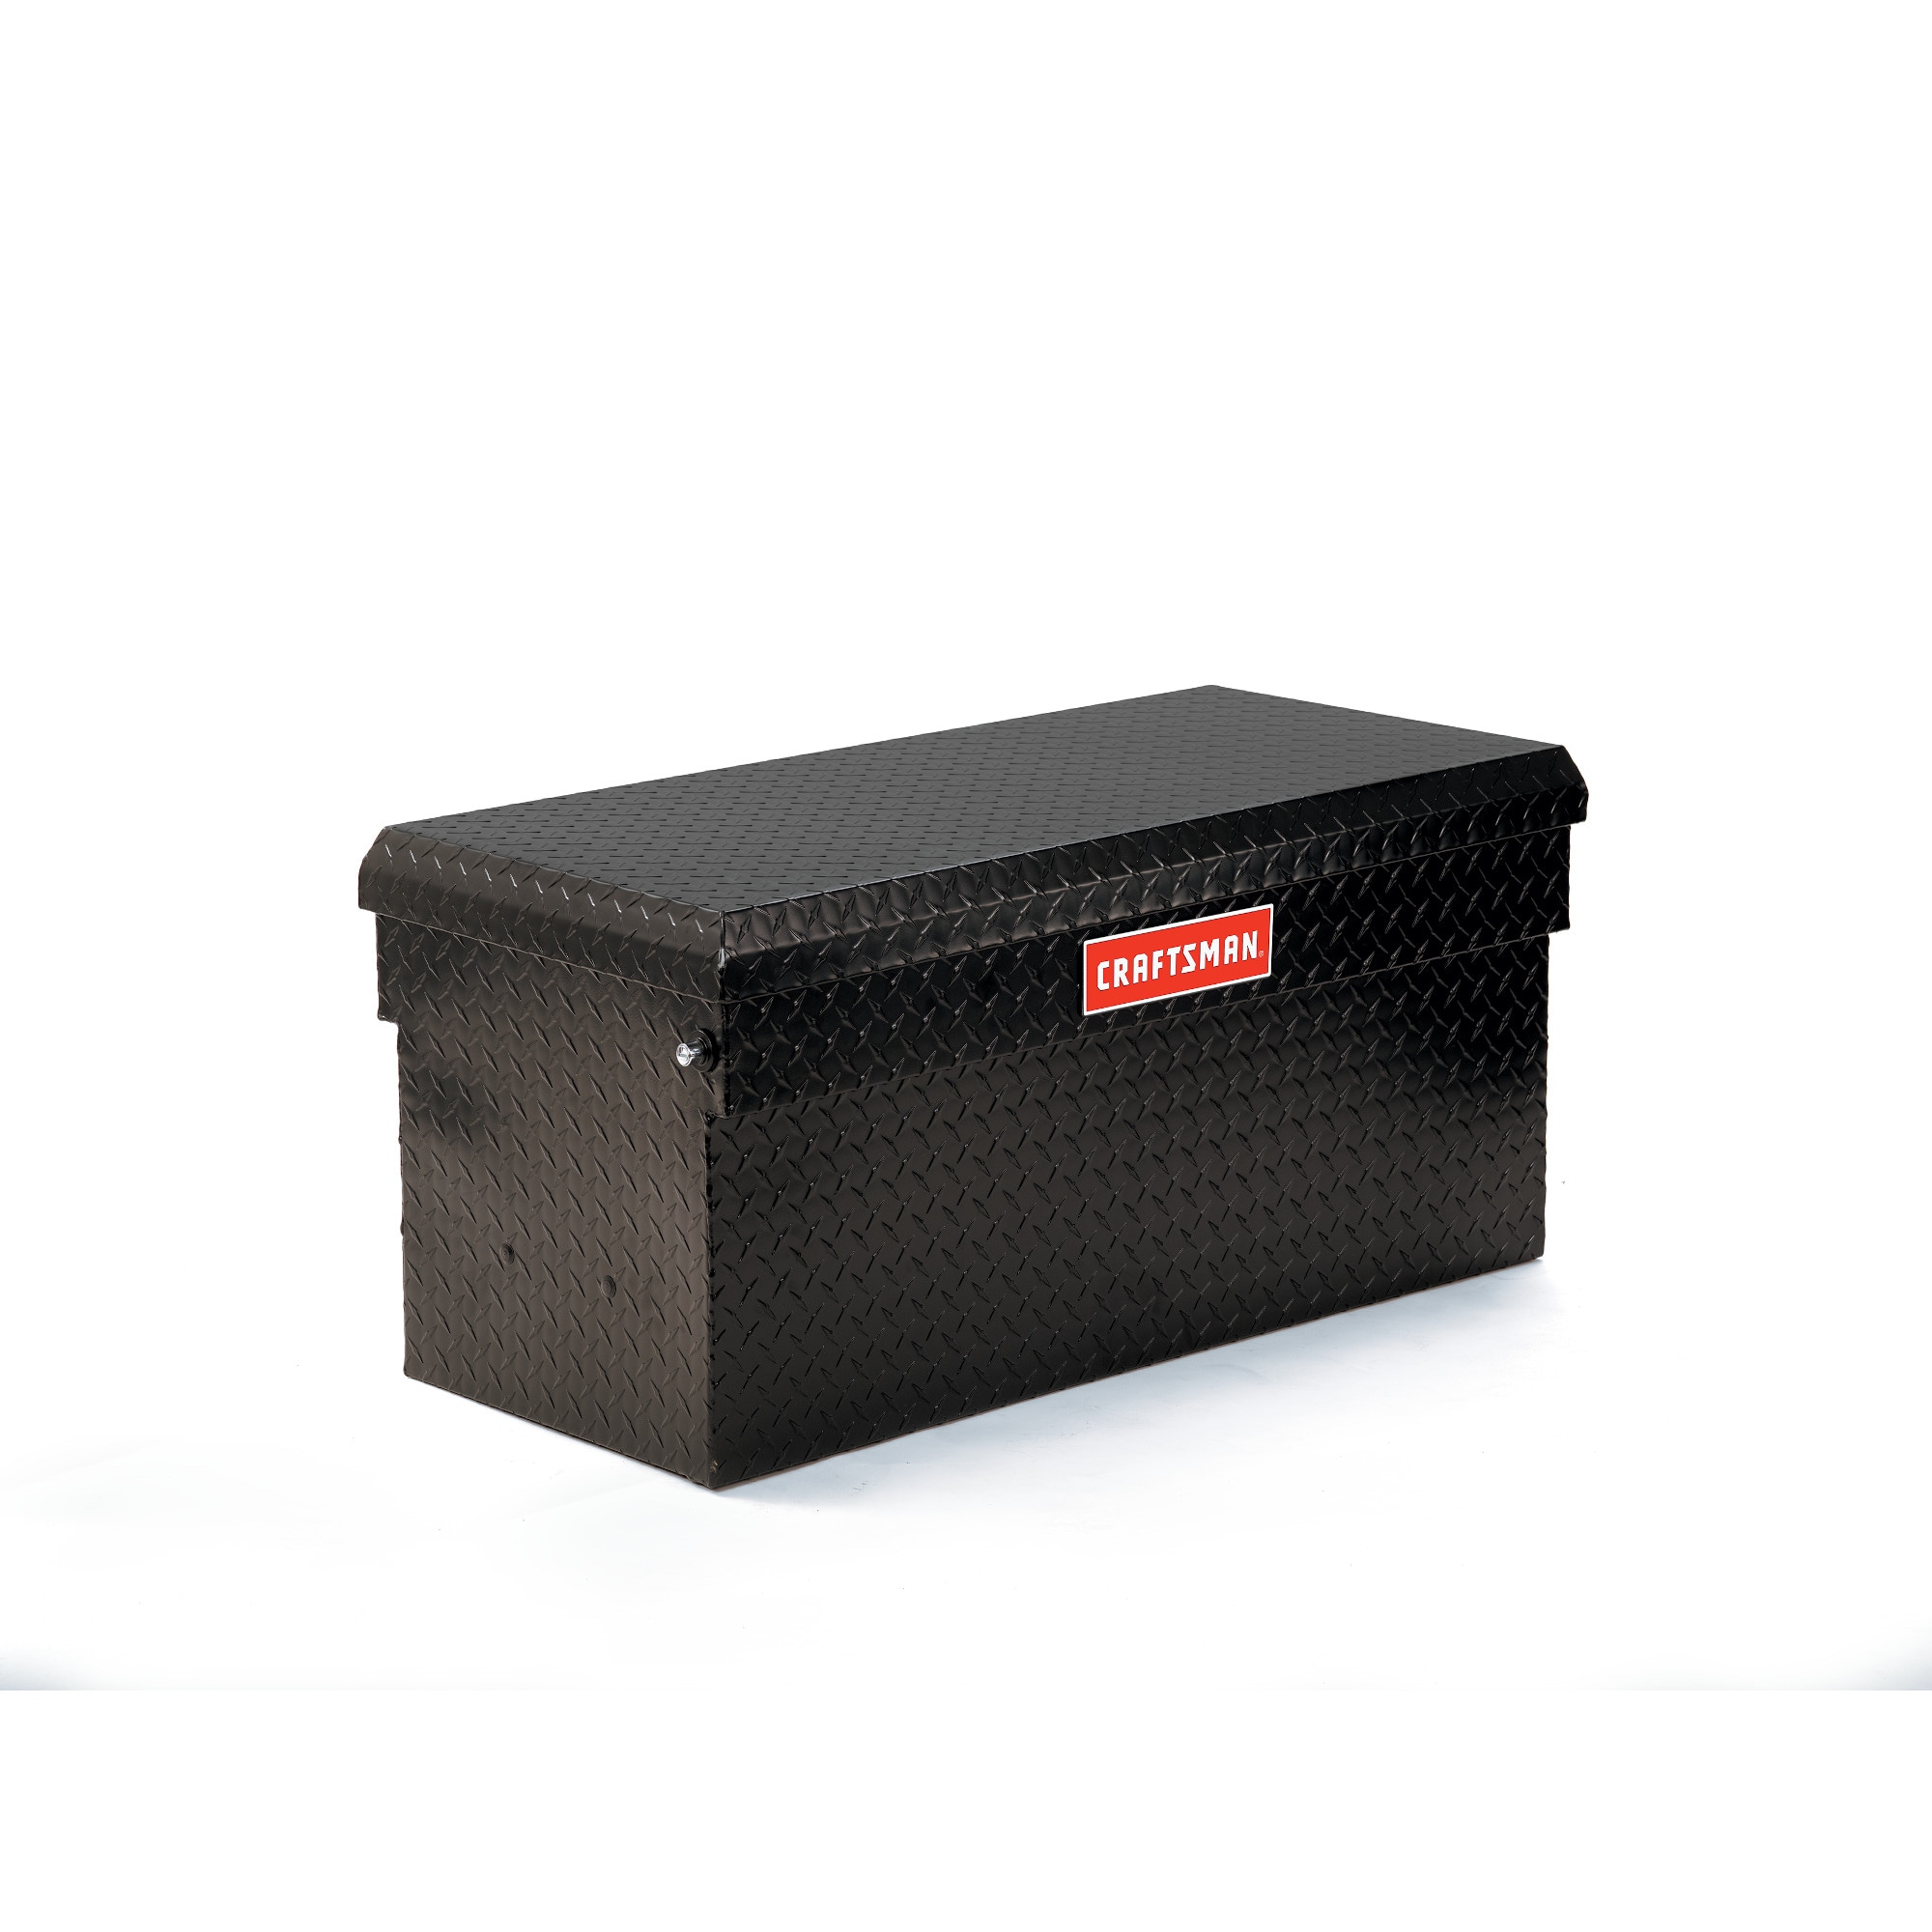 12 Inch Wide Truck Tool Boxes at